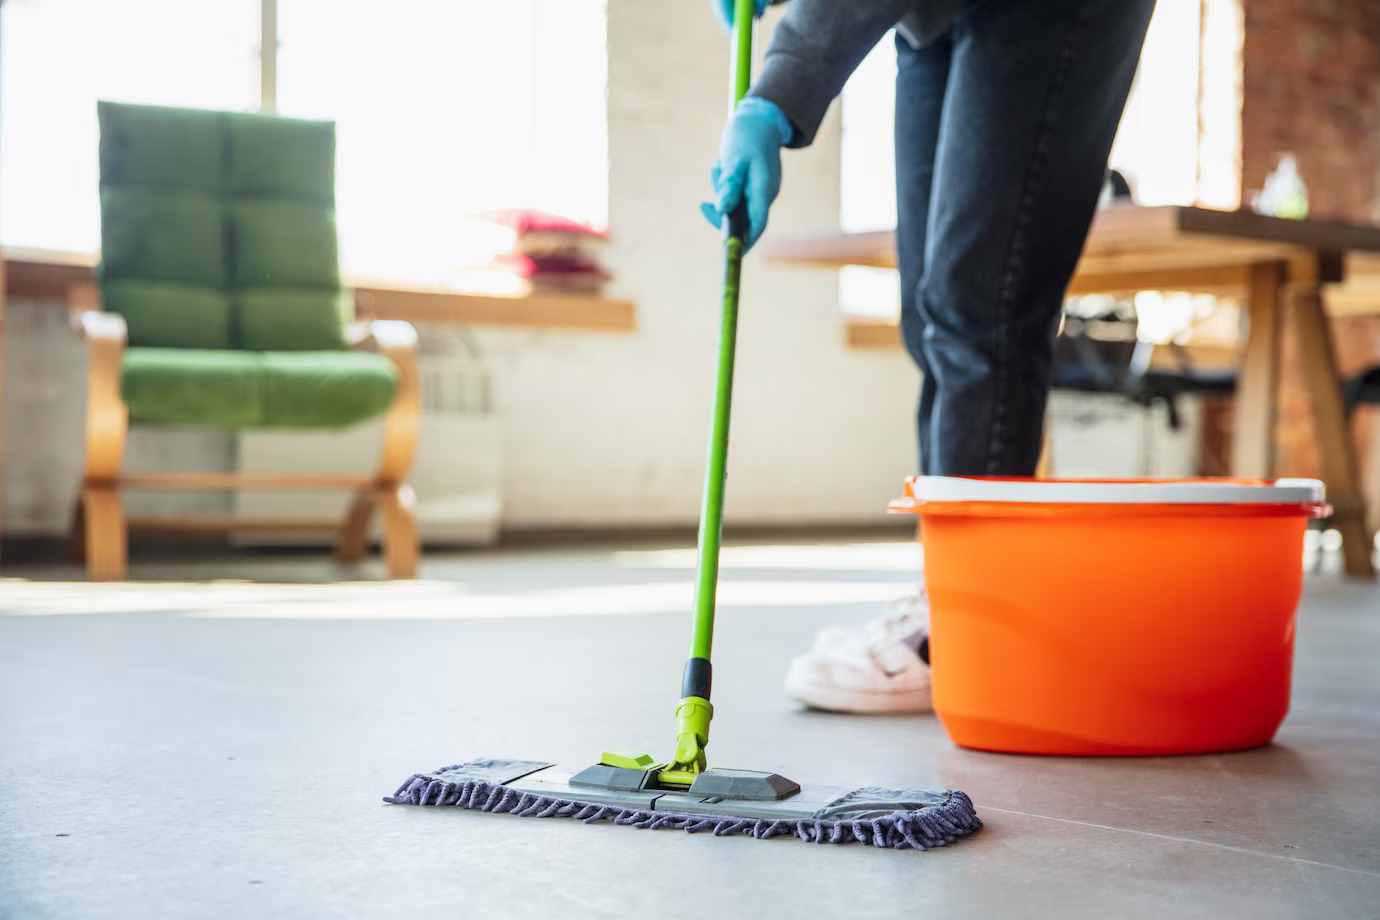 Domestic House Cleaning Services in Stoke Newington